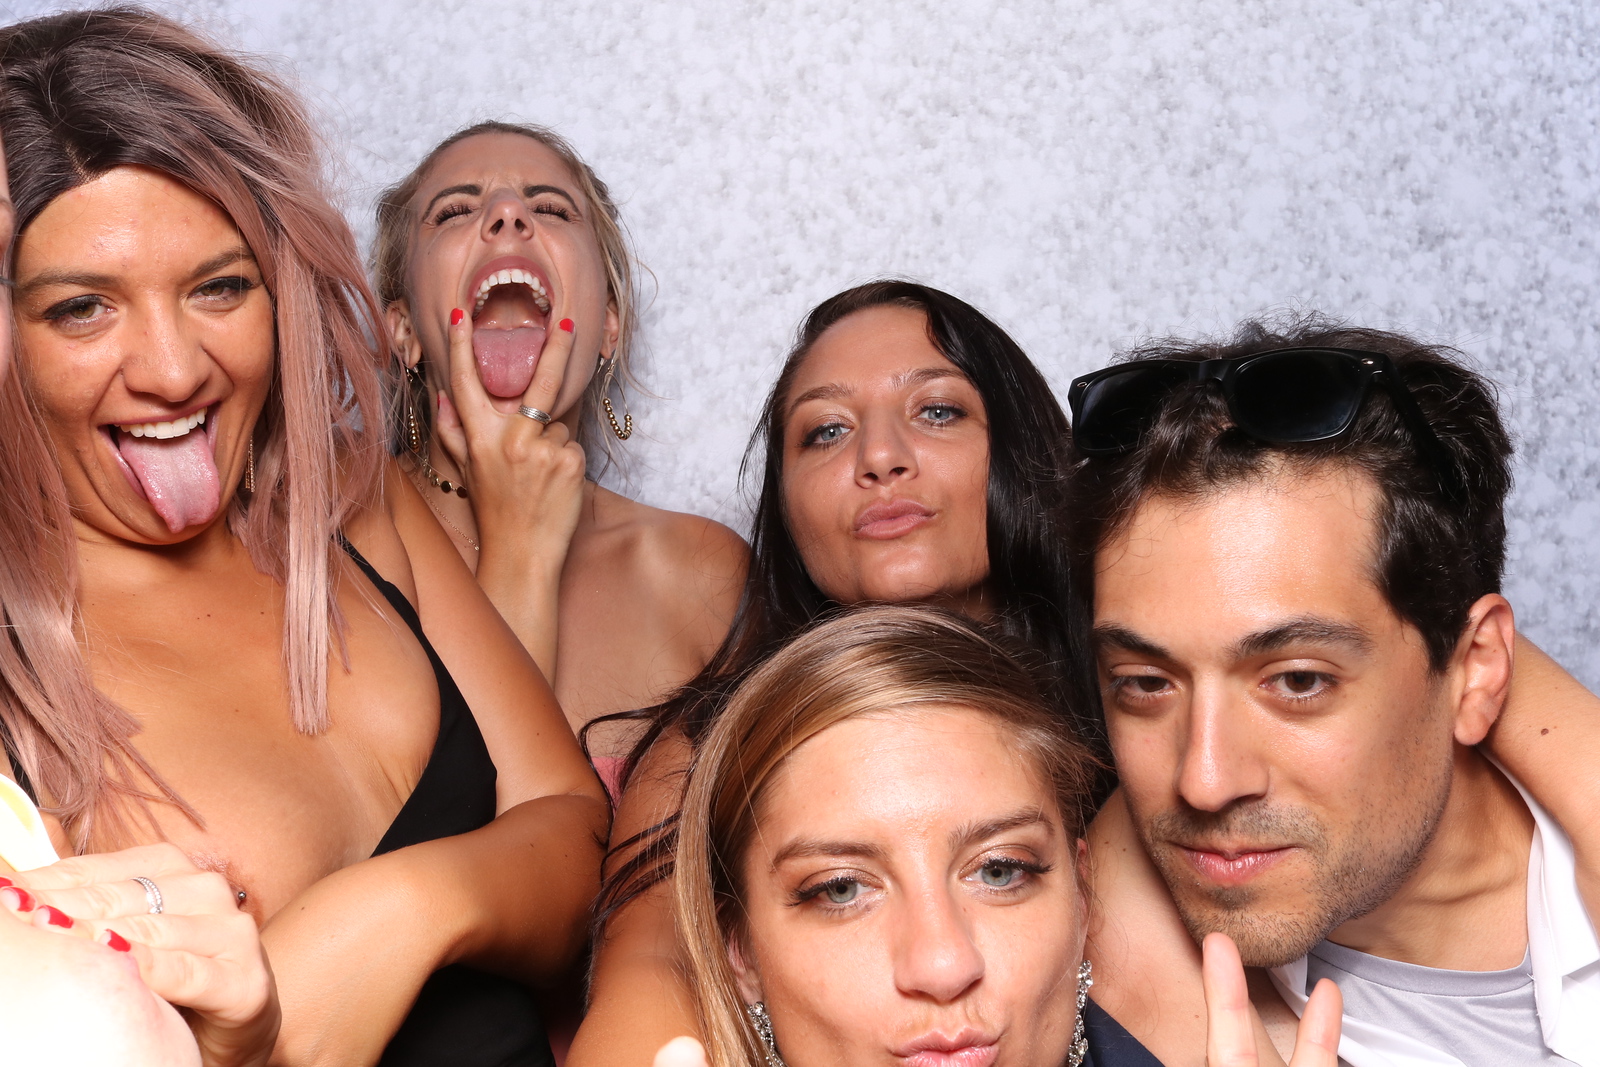 amit kaundal recommends Photo Booth Boob Flash